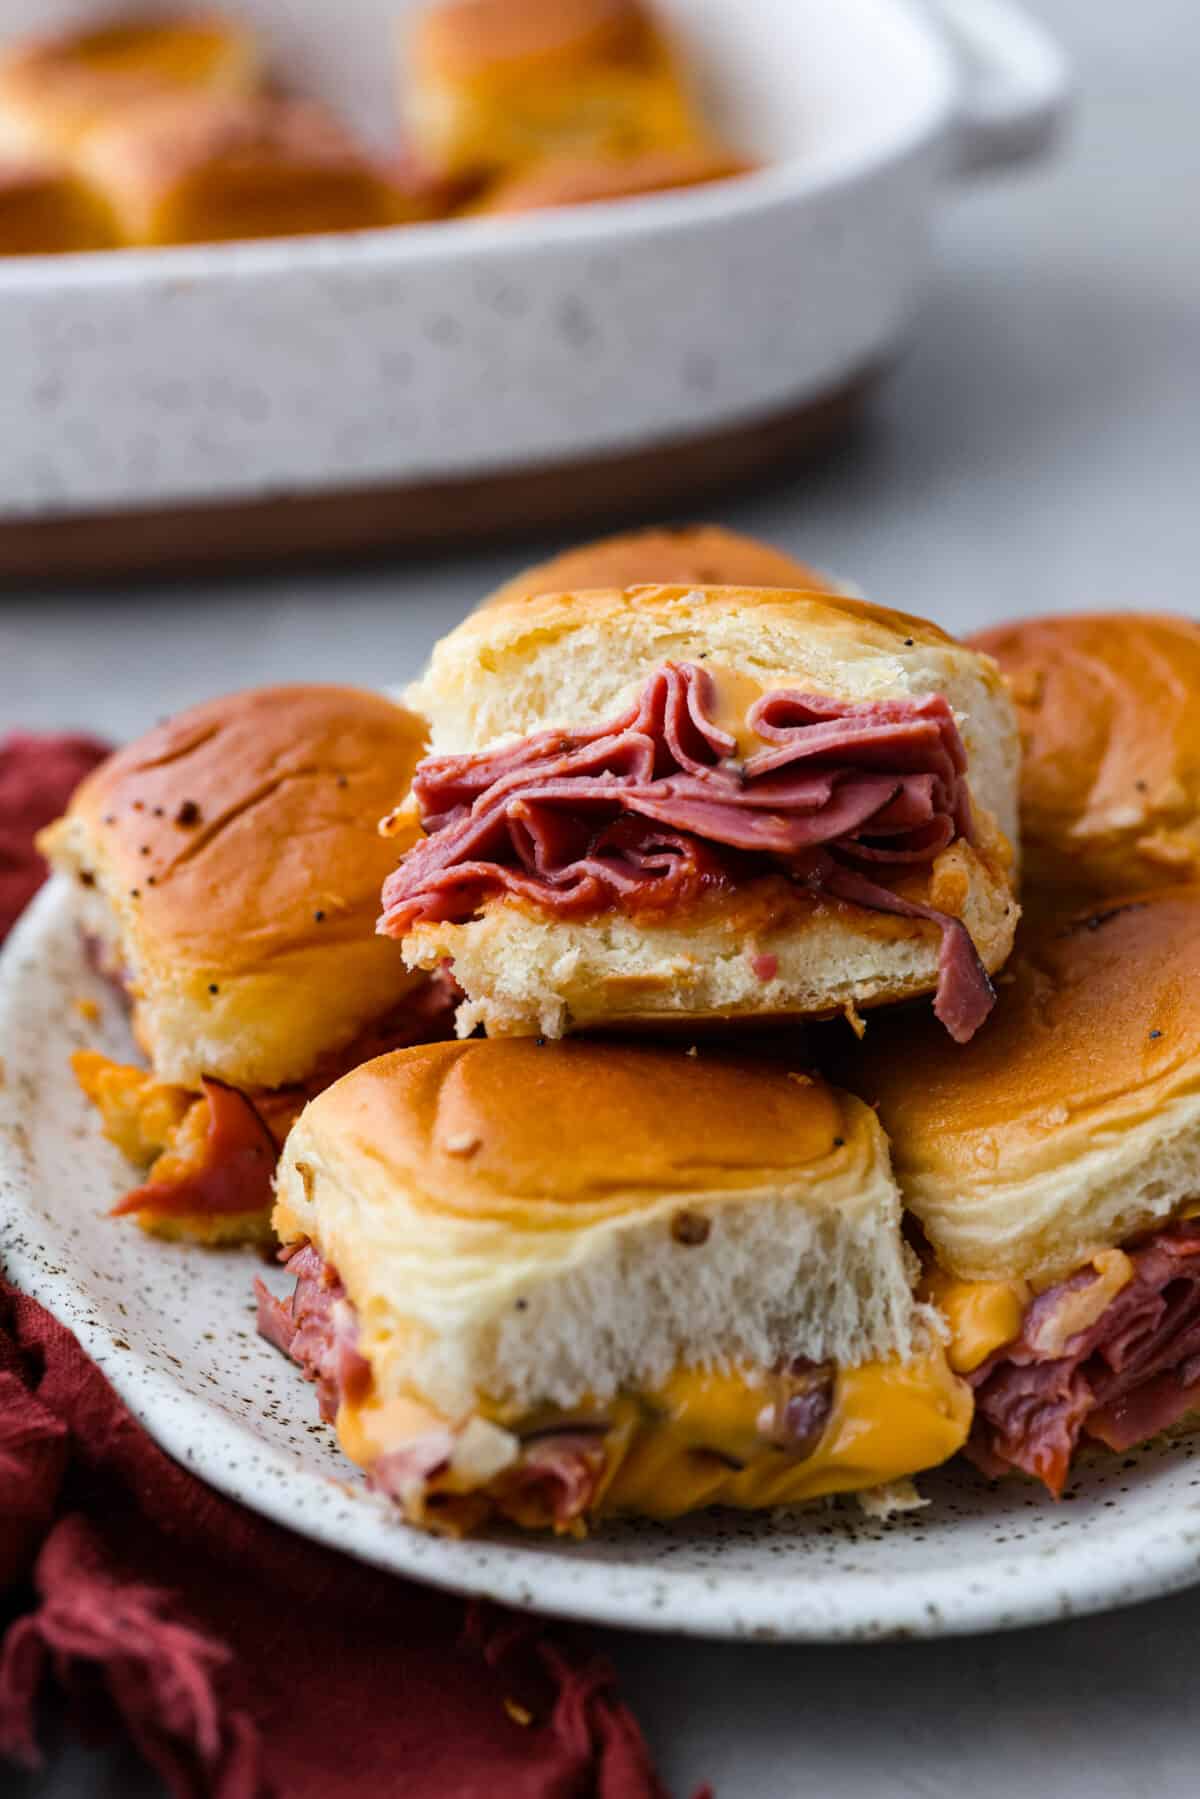 Beef and cheddar sliders served on a plate.